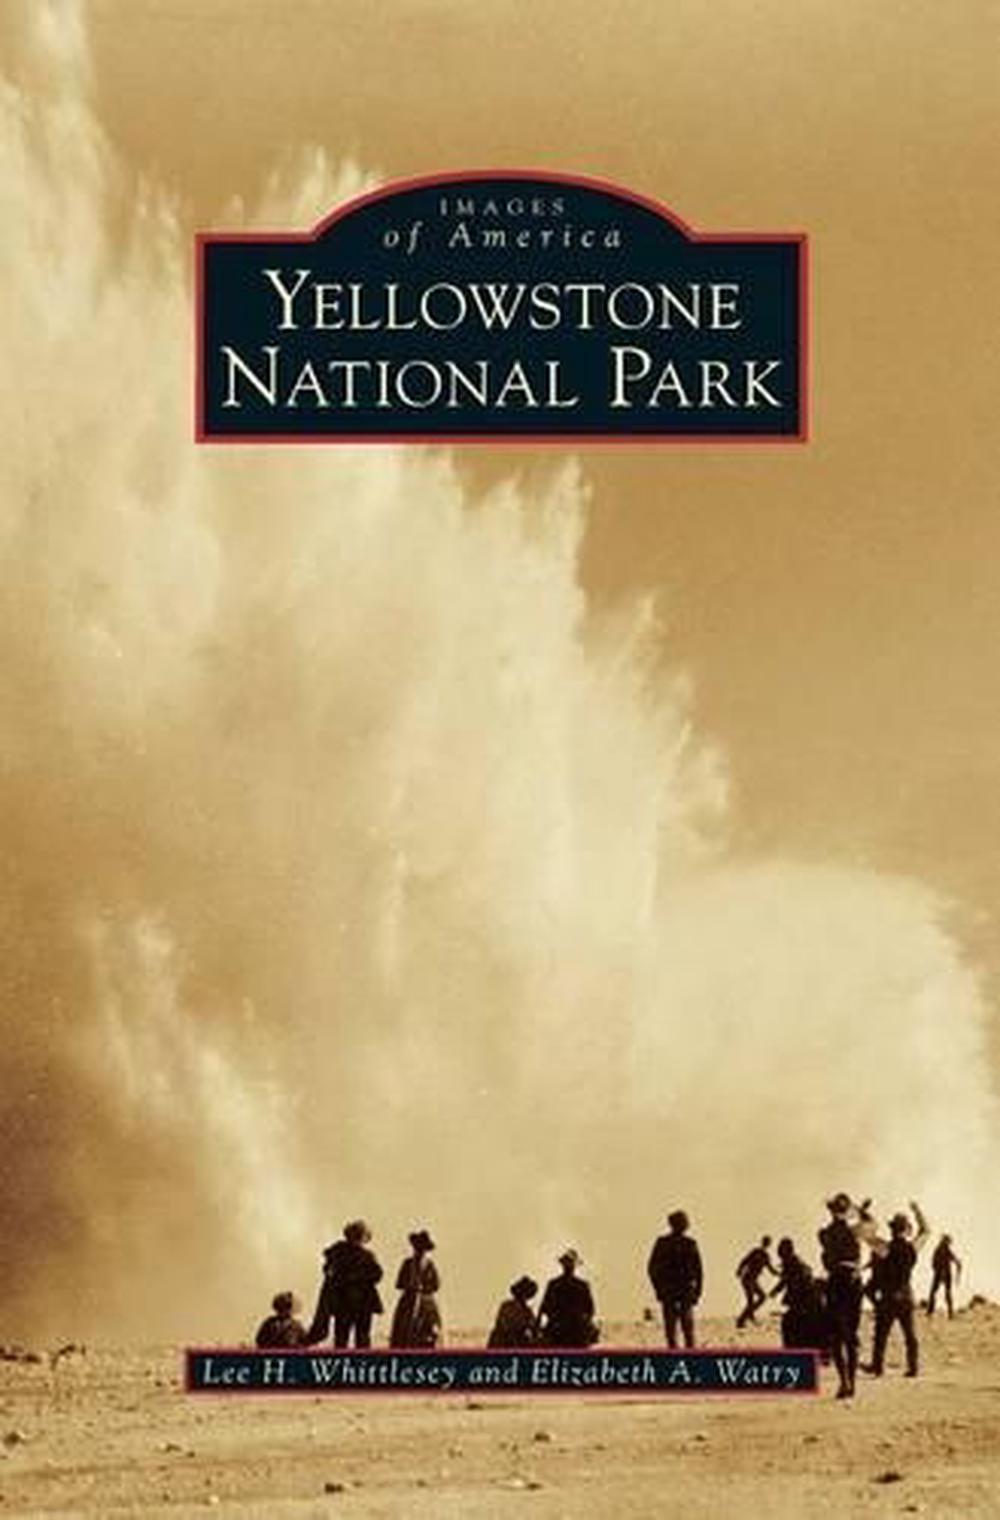 death in yellowstone by lee h whittlesey